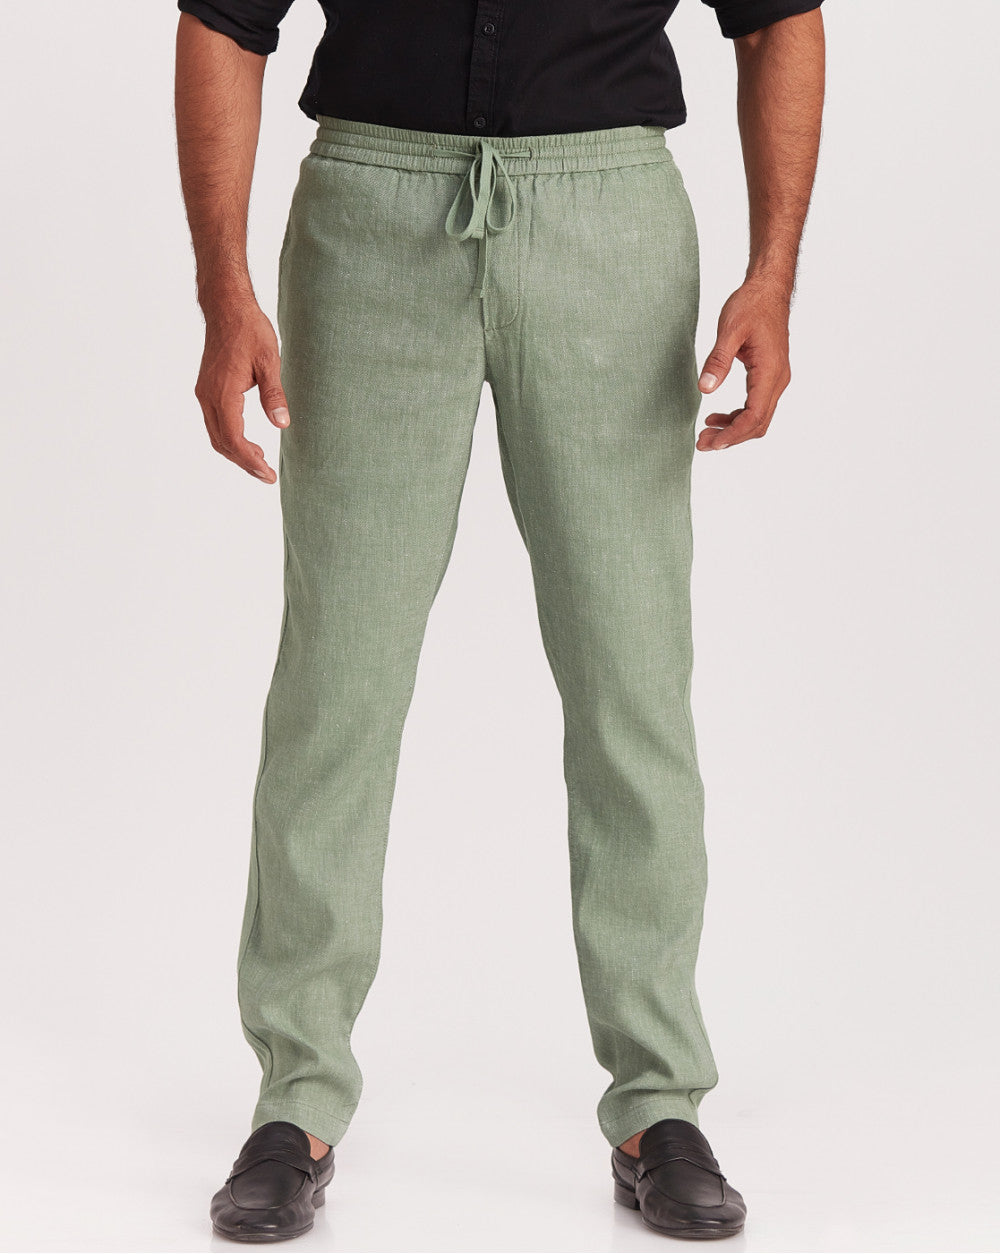 Tapered Fit Comfort Pants - Dark Ivy Green